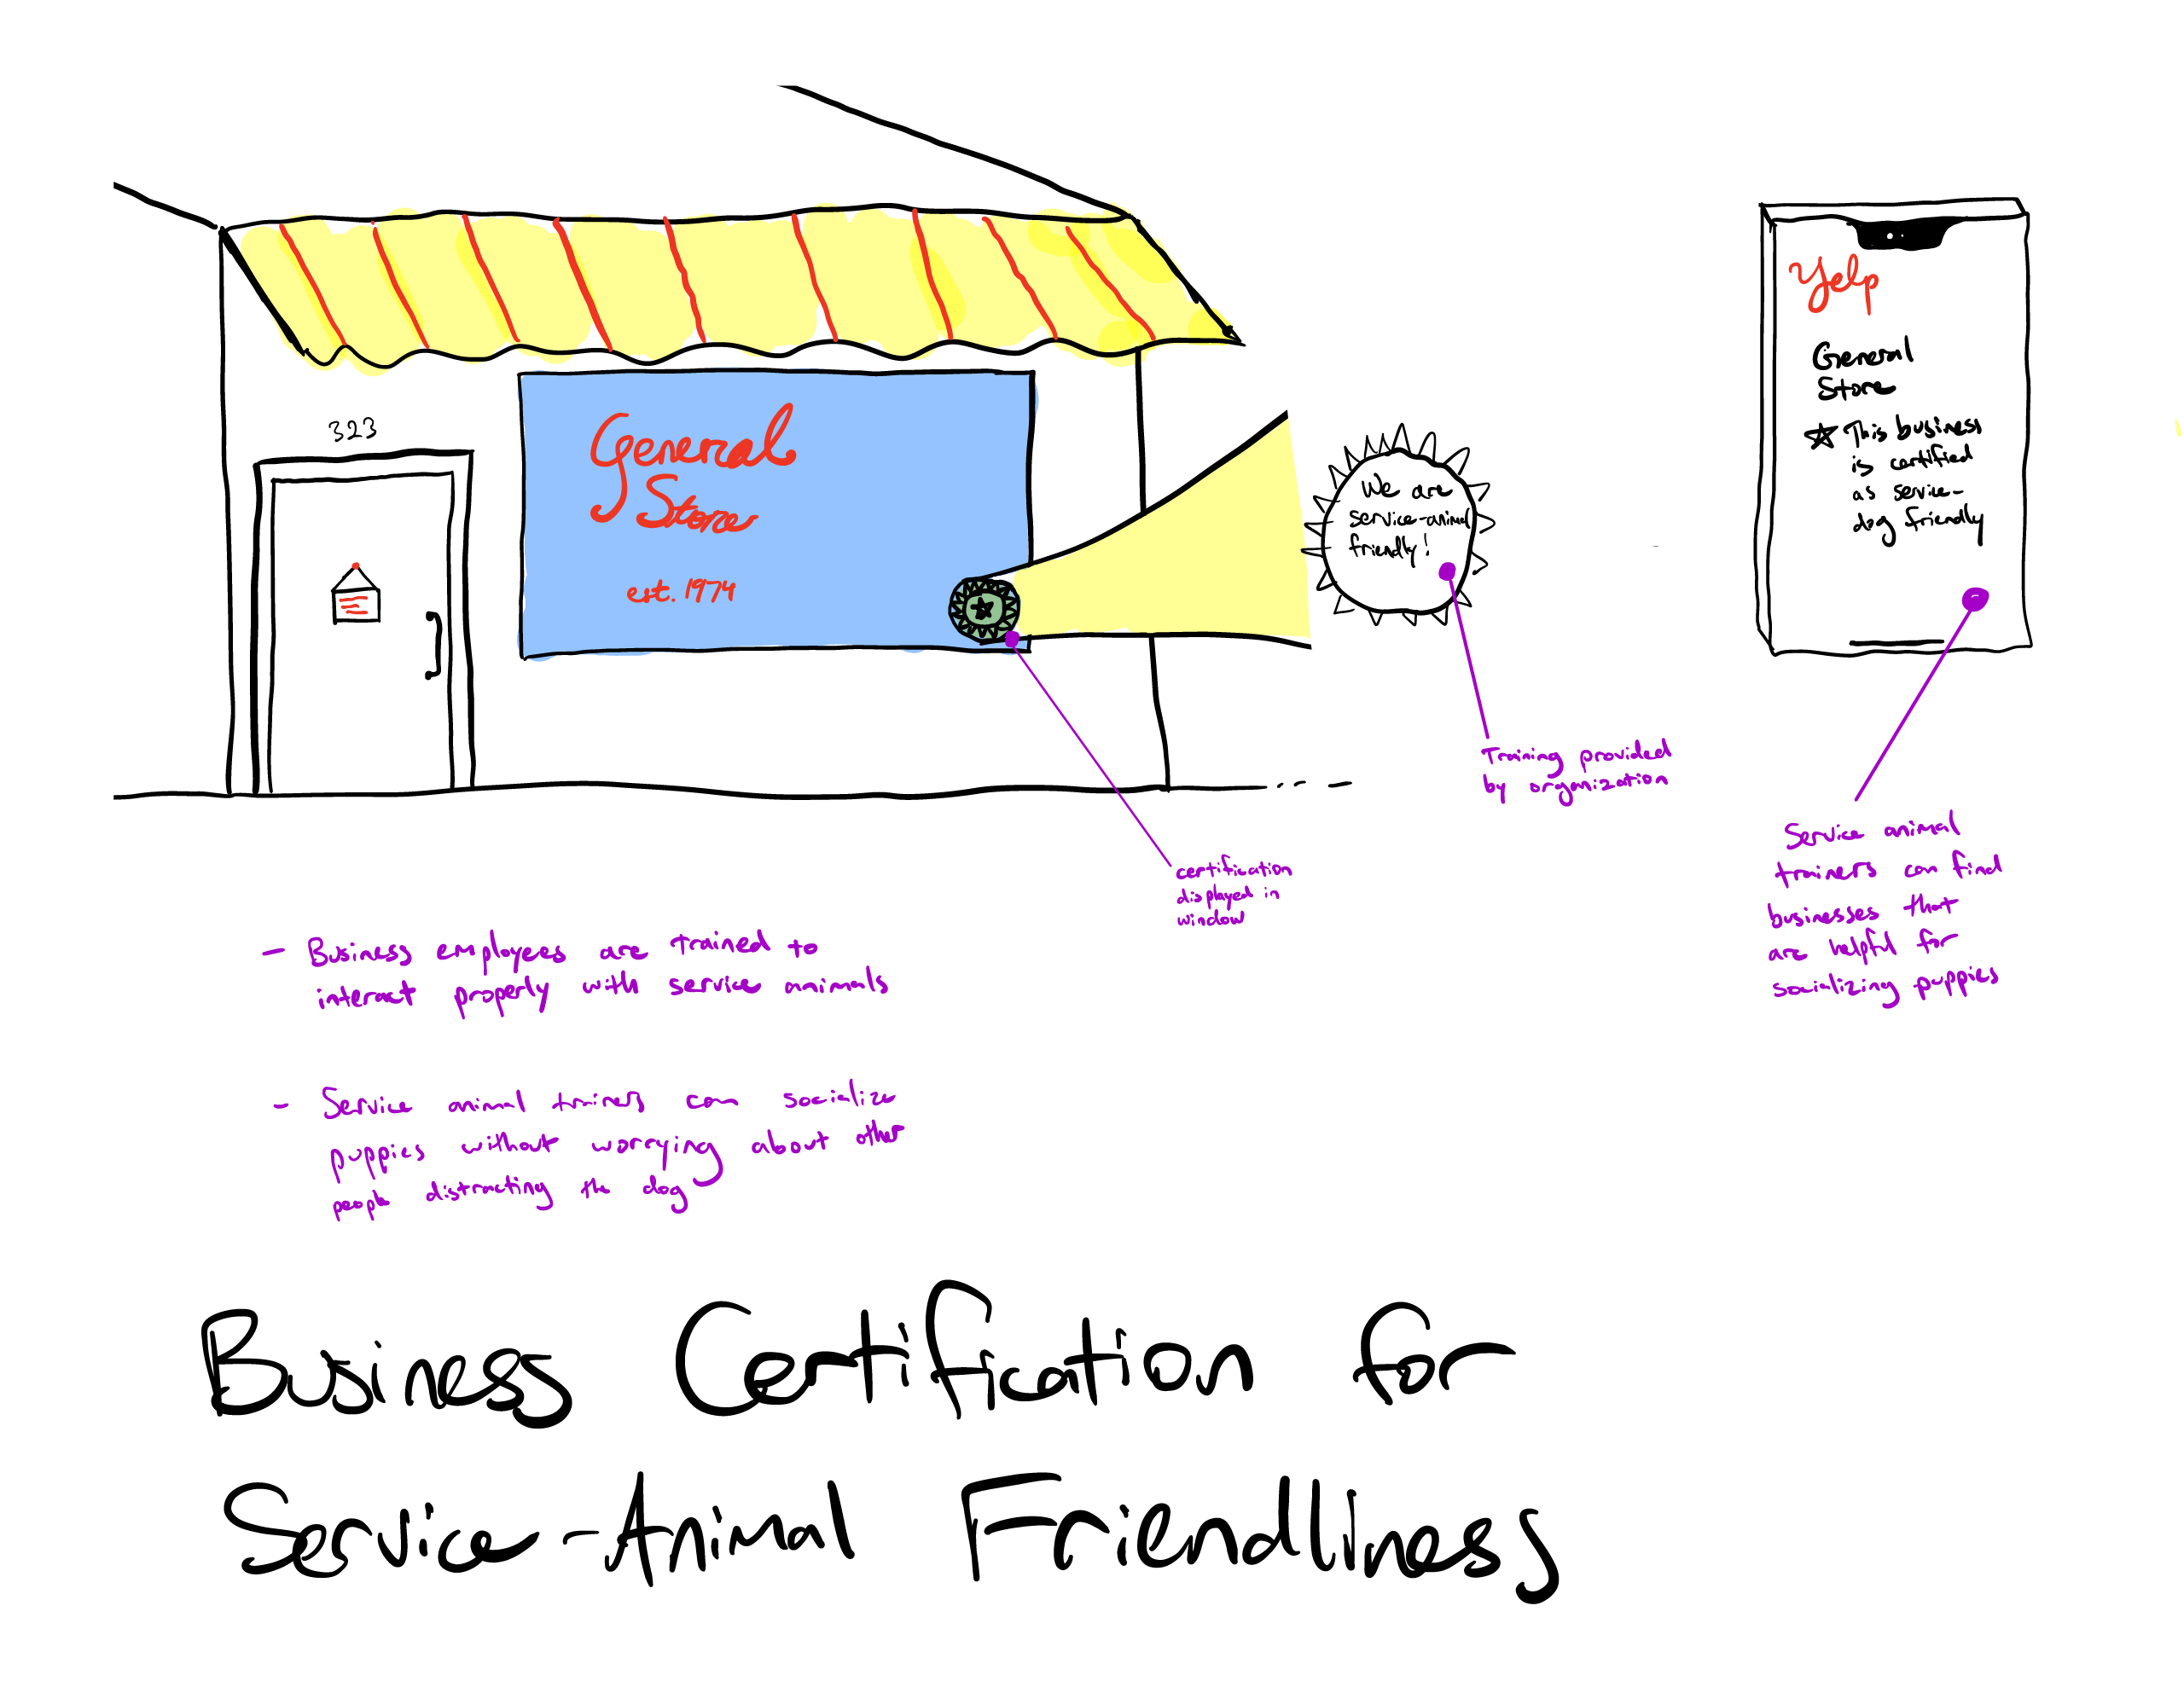 A sketch of a storefront and a zoomed in view of a service dog certification sign